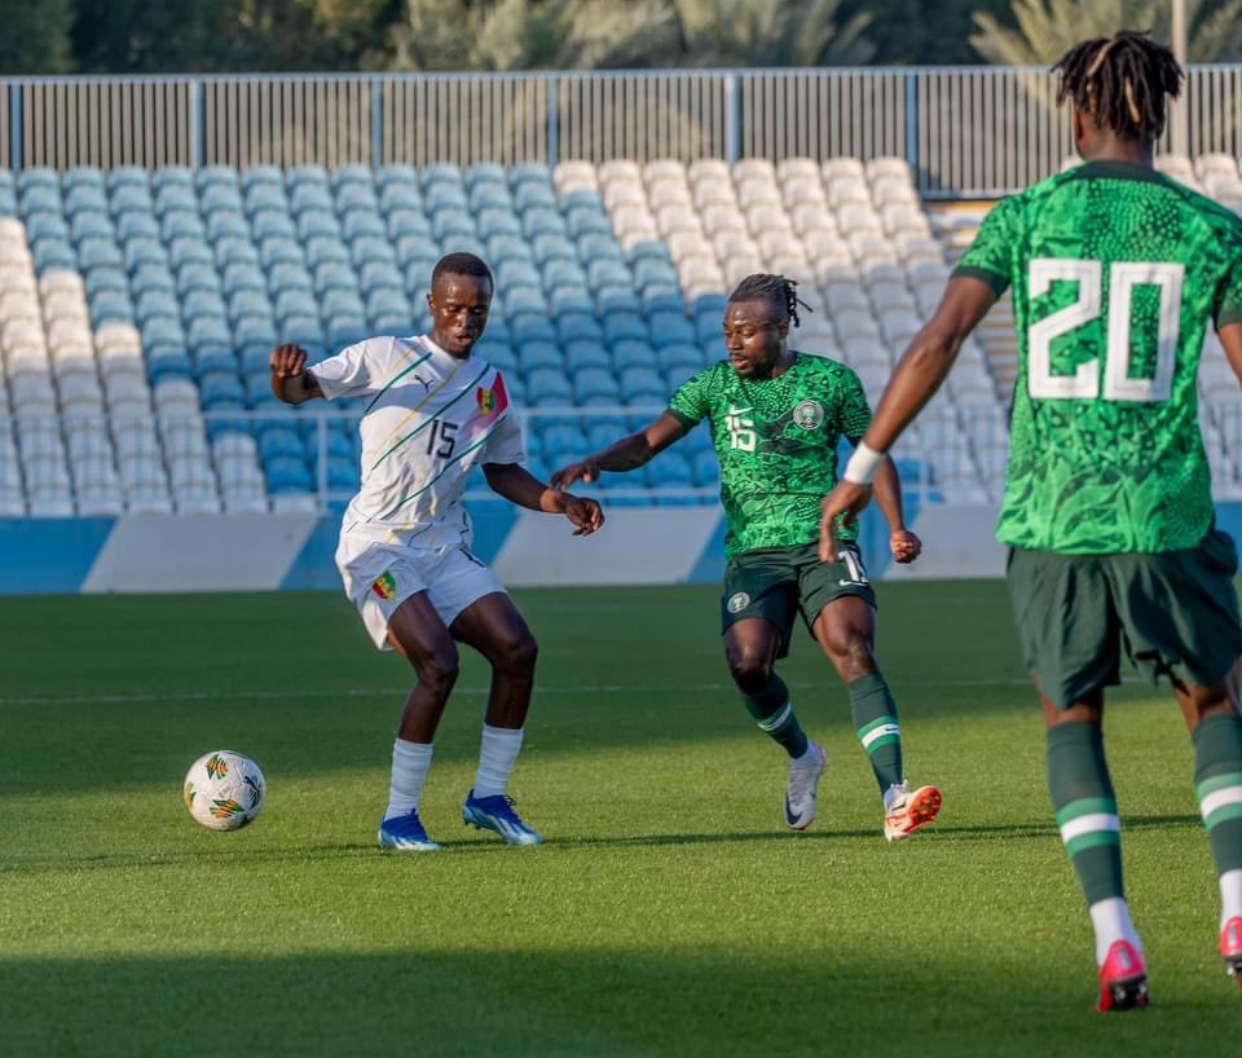 AFCON 2023: Nwabali In Goal, Simon Misses Penalty As Guinea Beat Super Eagles 2-0 In Friendly